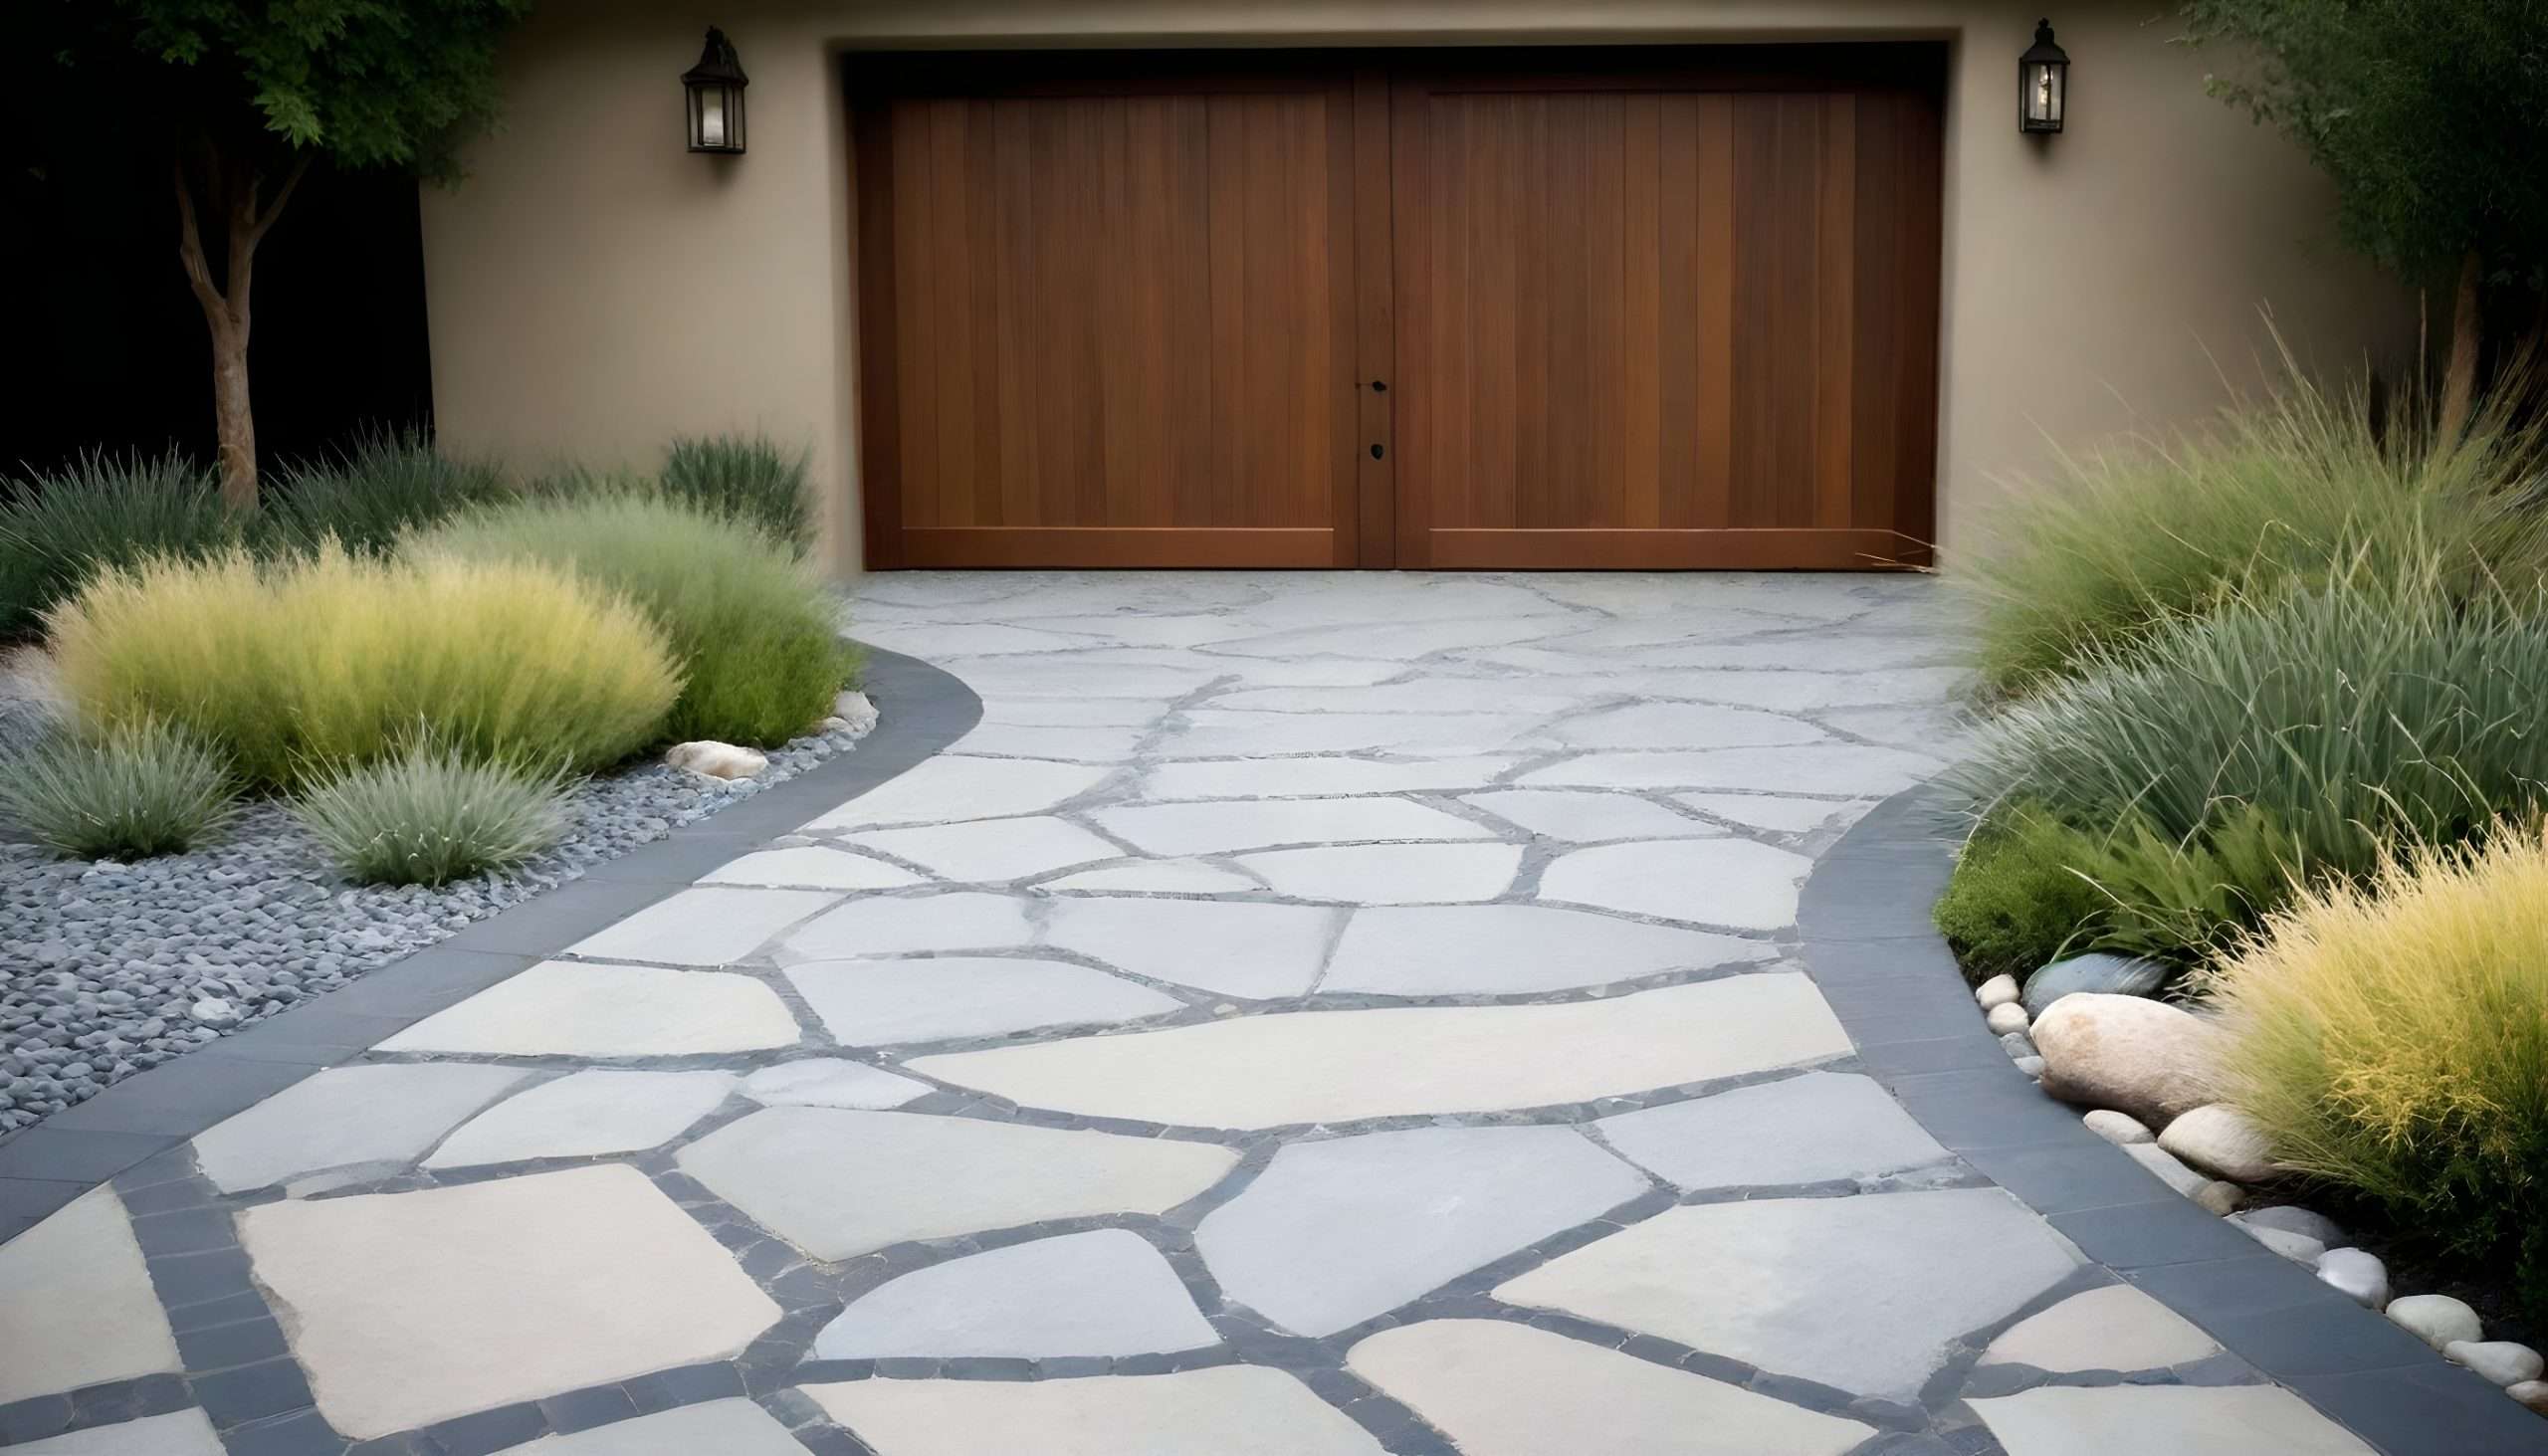 Sustainable Solutions driveway entrance